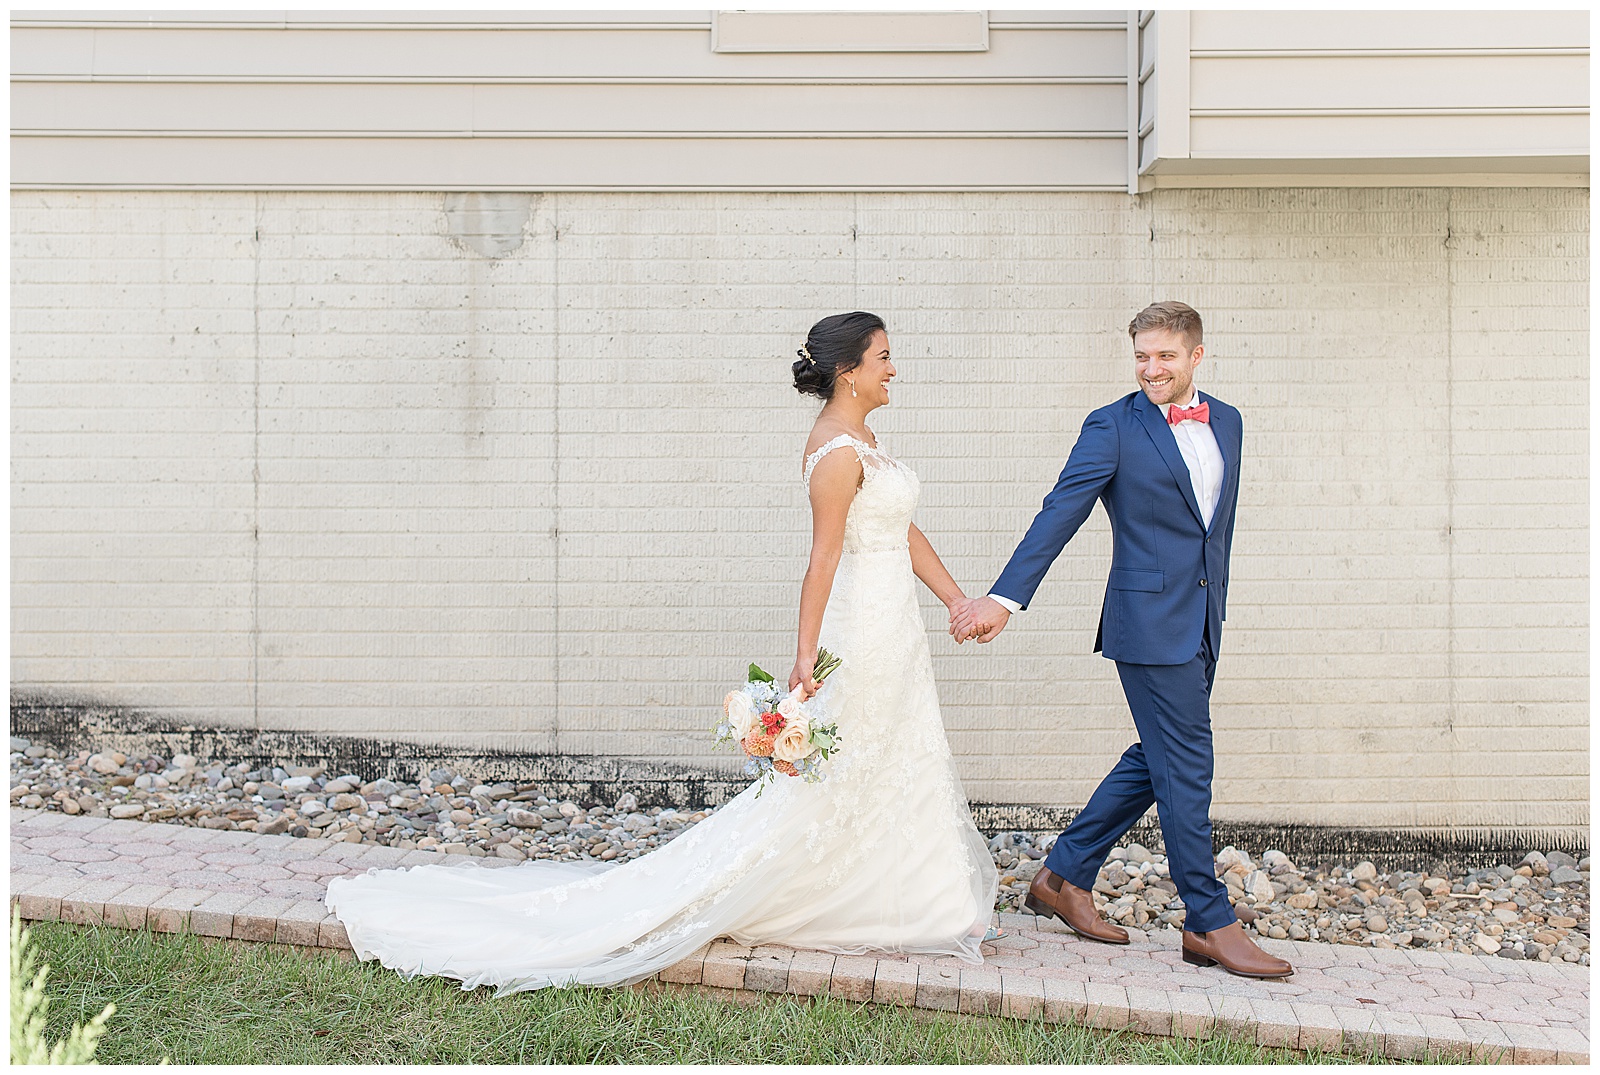 groom holds bride's left hand leading her down pathway along building on sunny day in maryland